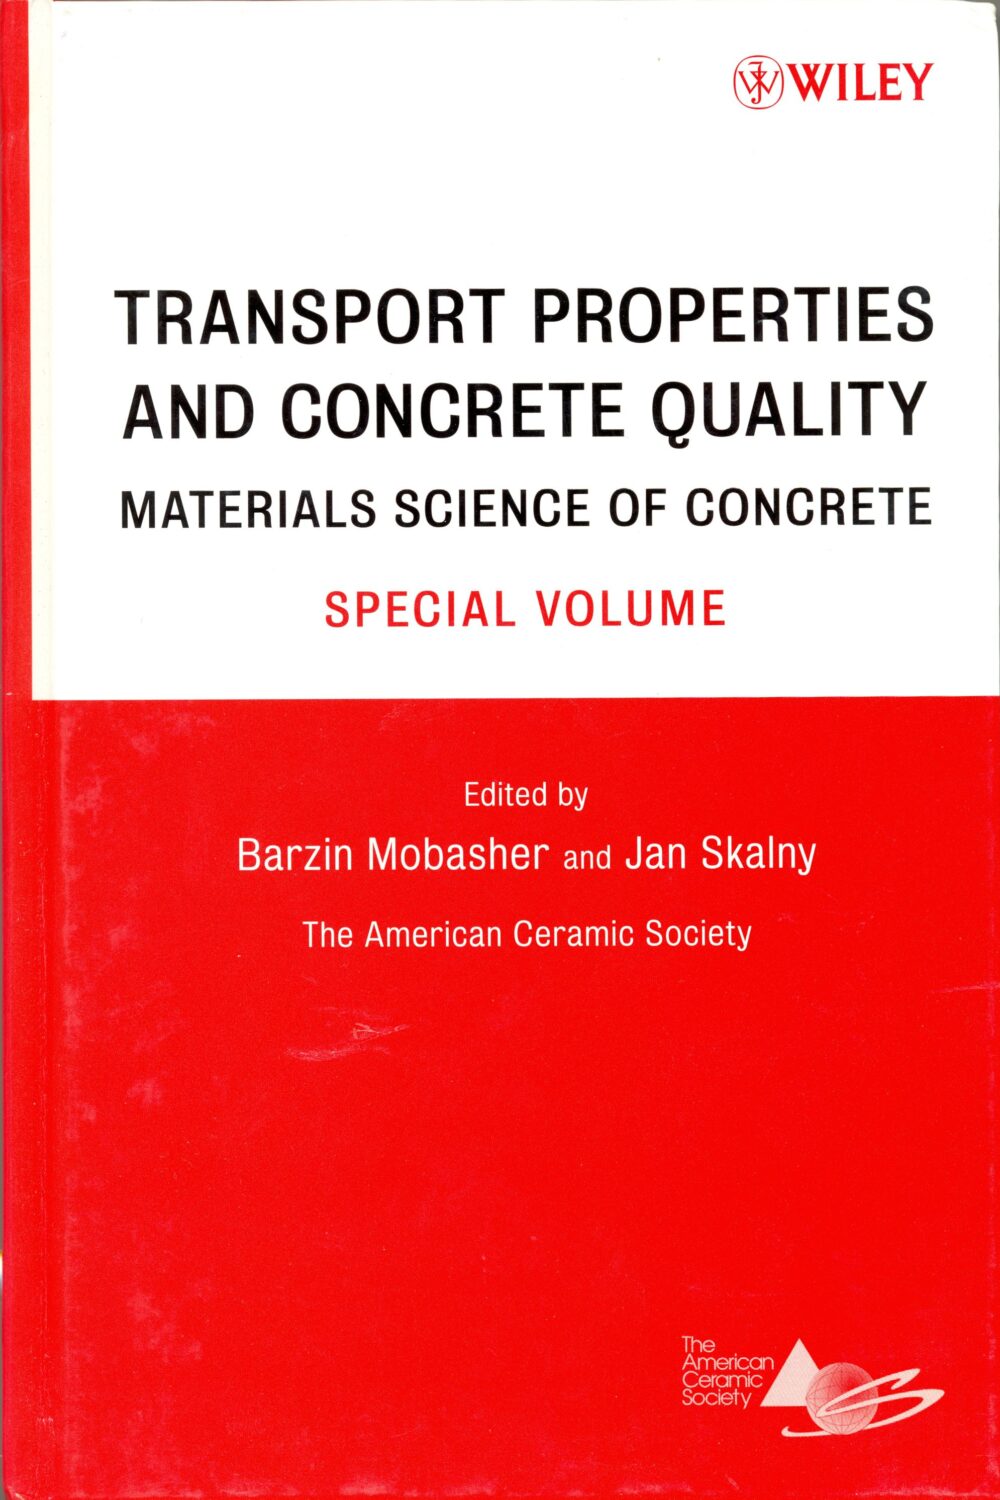 Book cover: Transport properties and concrete quality